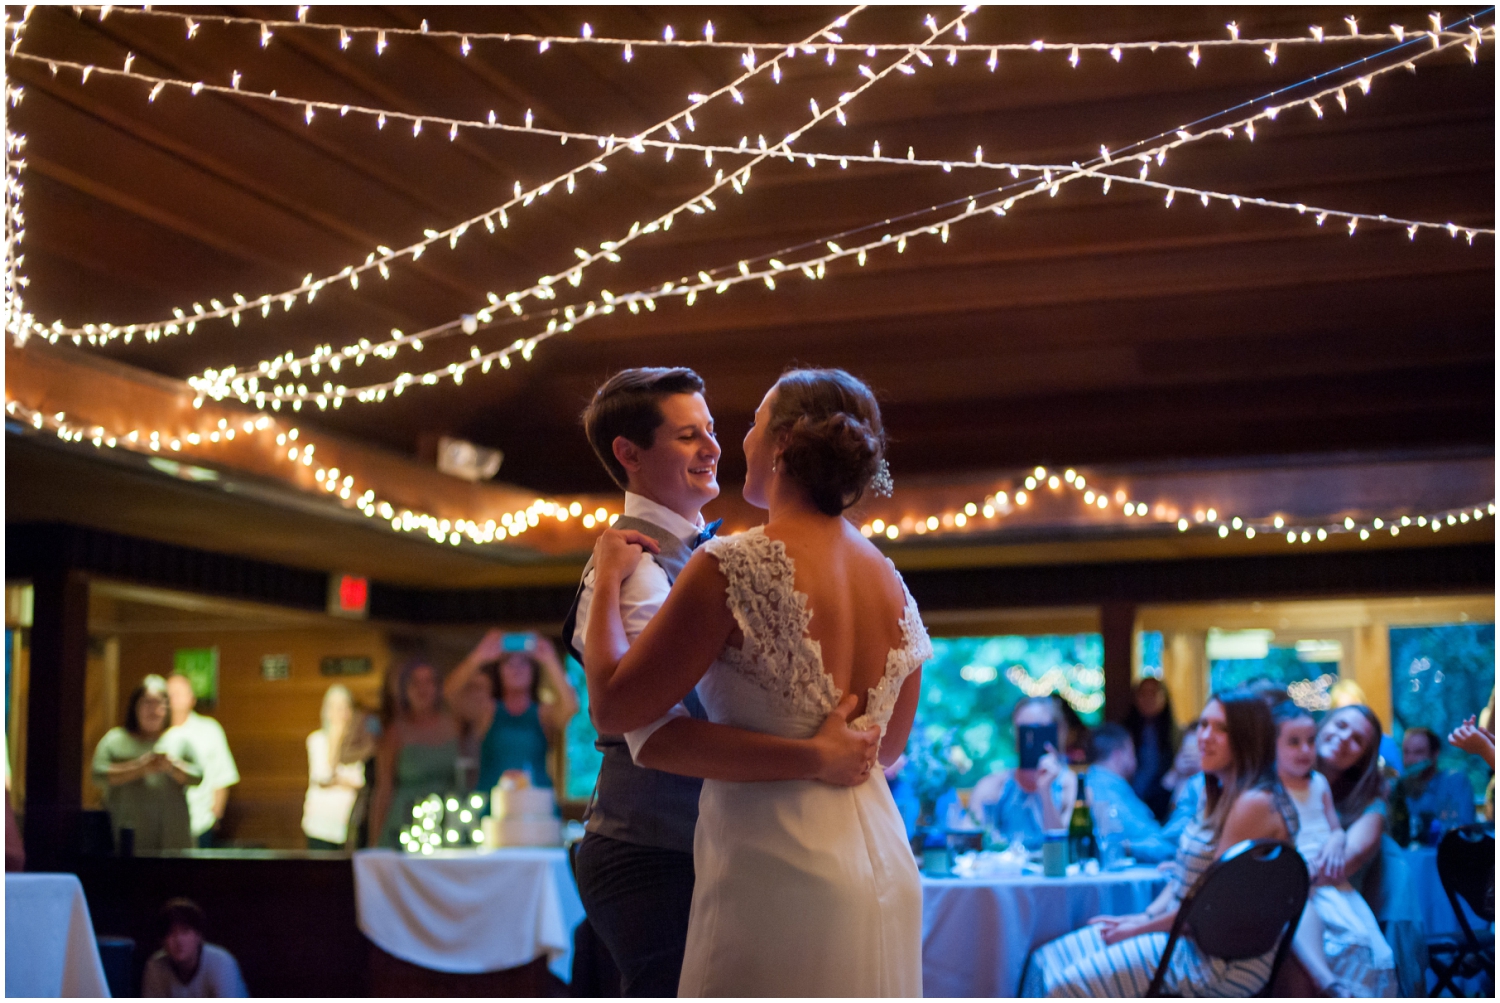 First dance at Sequoia Lodge in Oakland